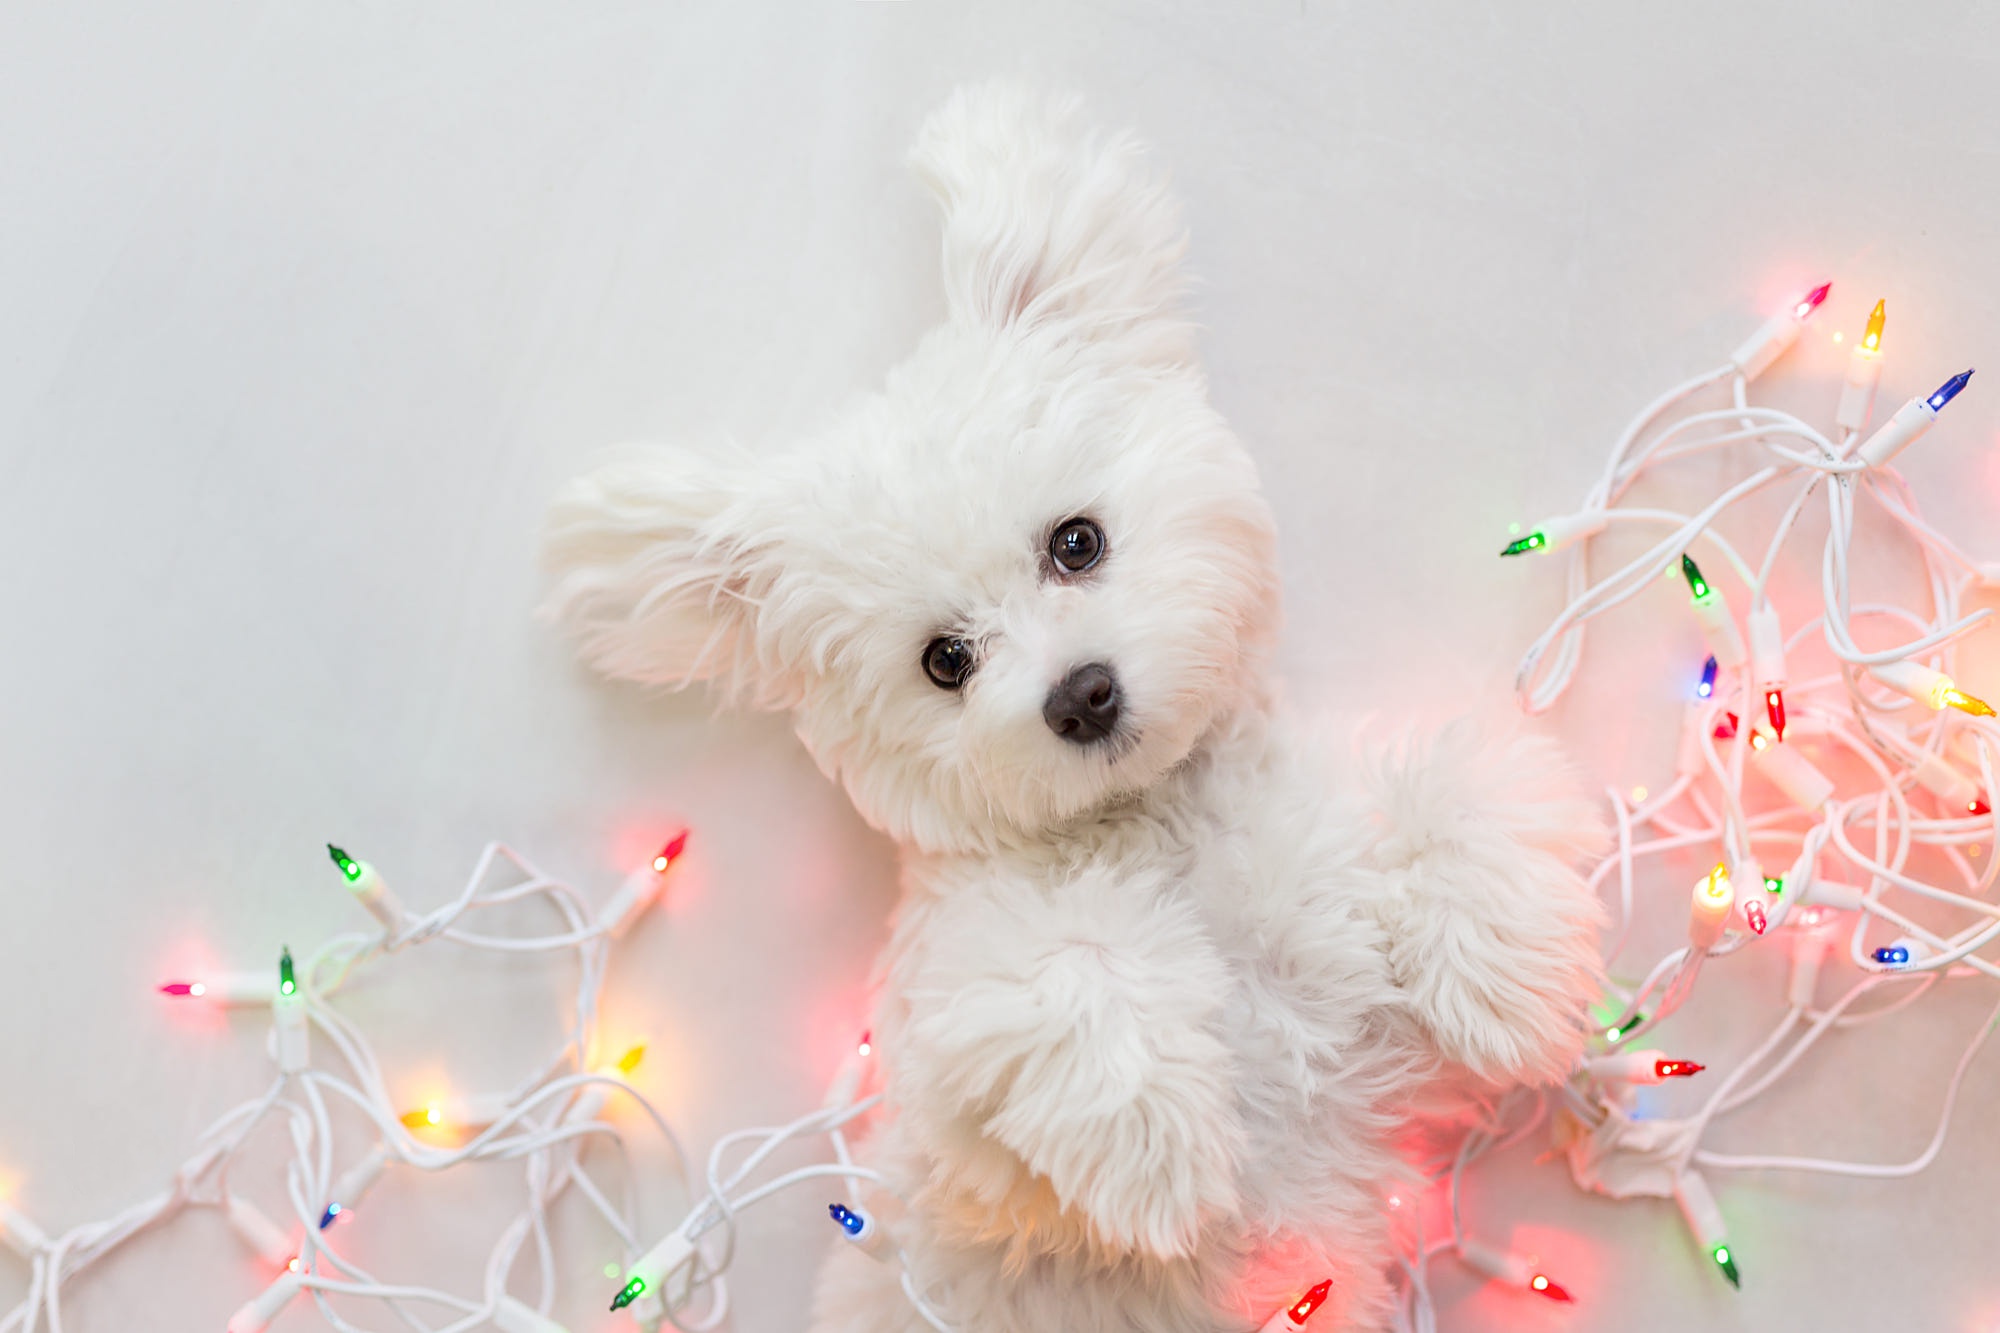 animal, west highland white terrier, baby animal, christmas lights, dog, puppy, dogs